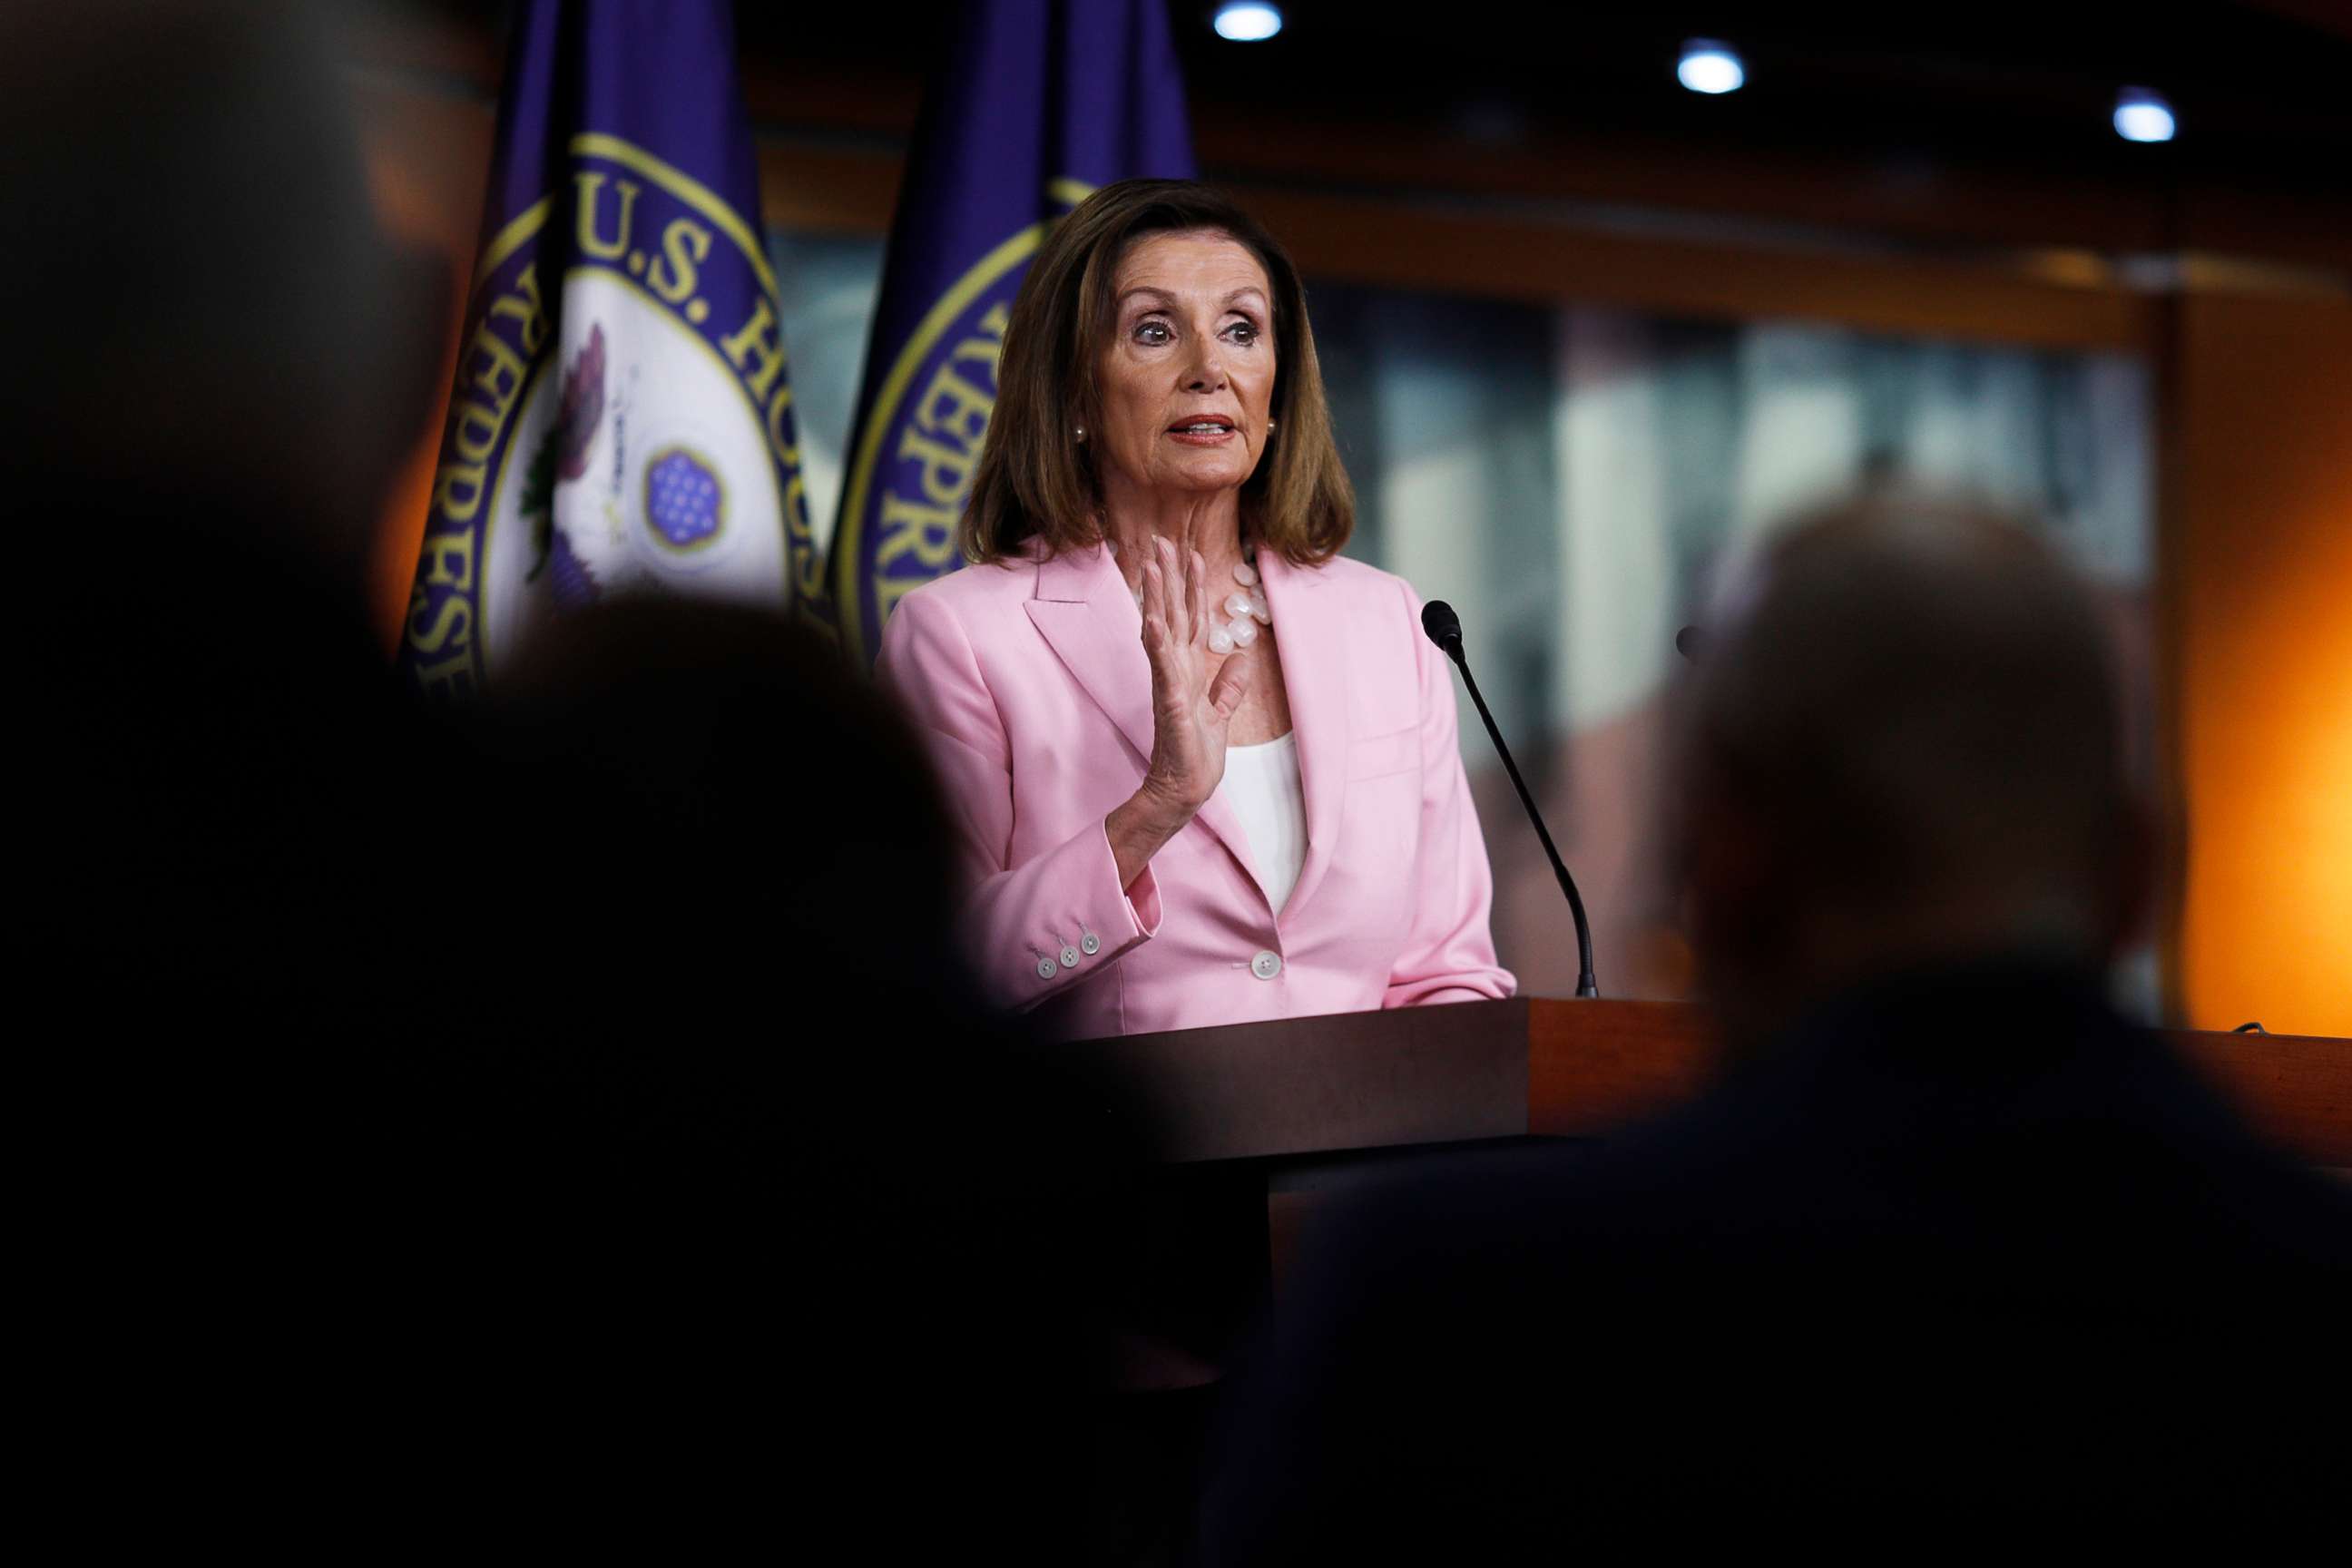 PHOTO:House Speaker Nancy Pelosi delivers remarks during her weekly news conference on Capitol Hill, Sept. 12, 2019 in Washington, D.C.